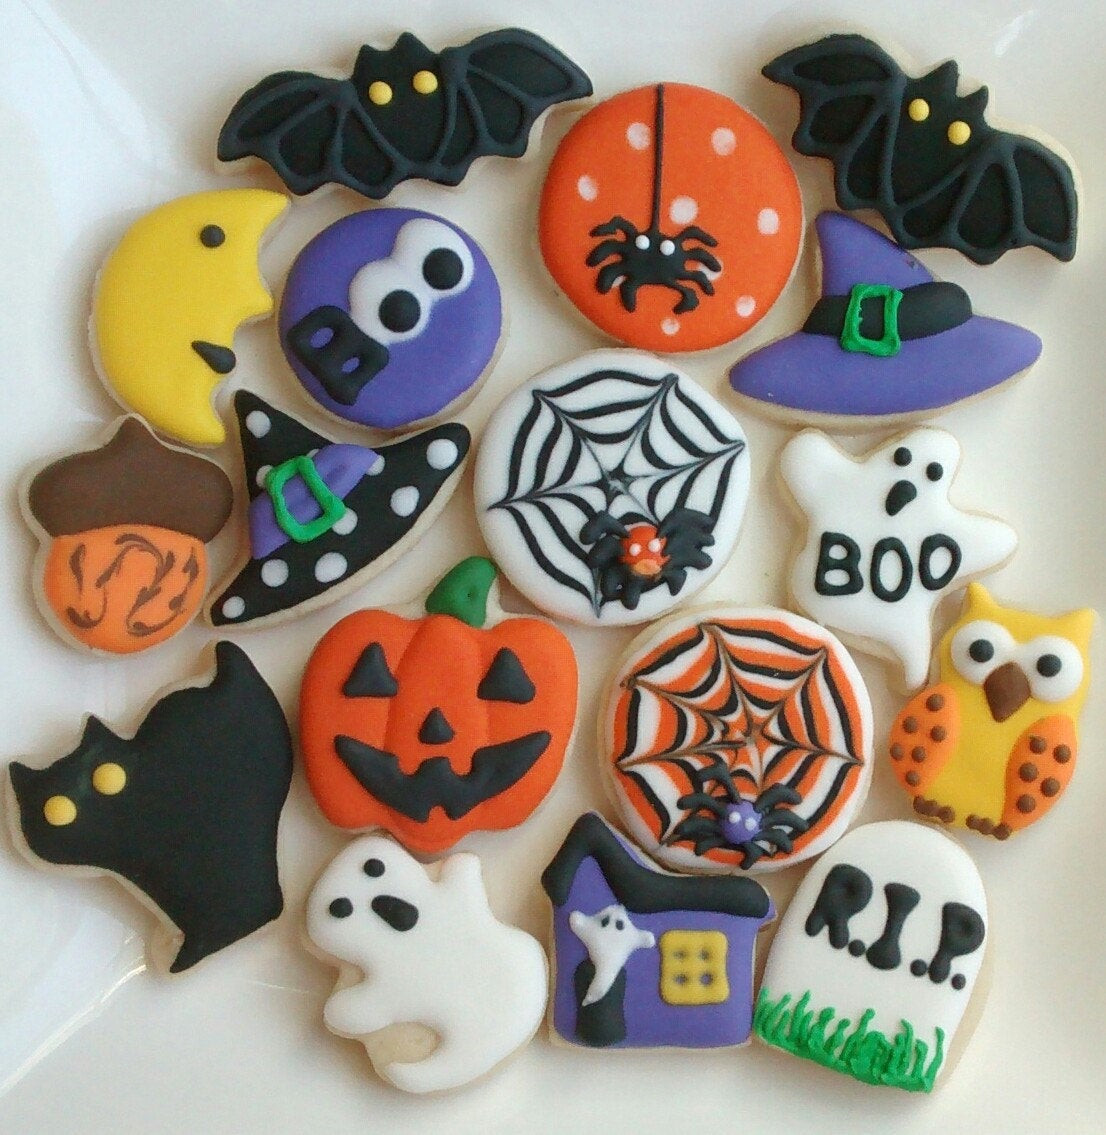 Halloween Decorated Sugar Cookies
 Halloween sugar cookies mini or large decorated with royal